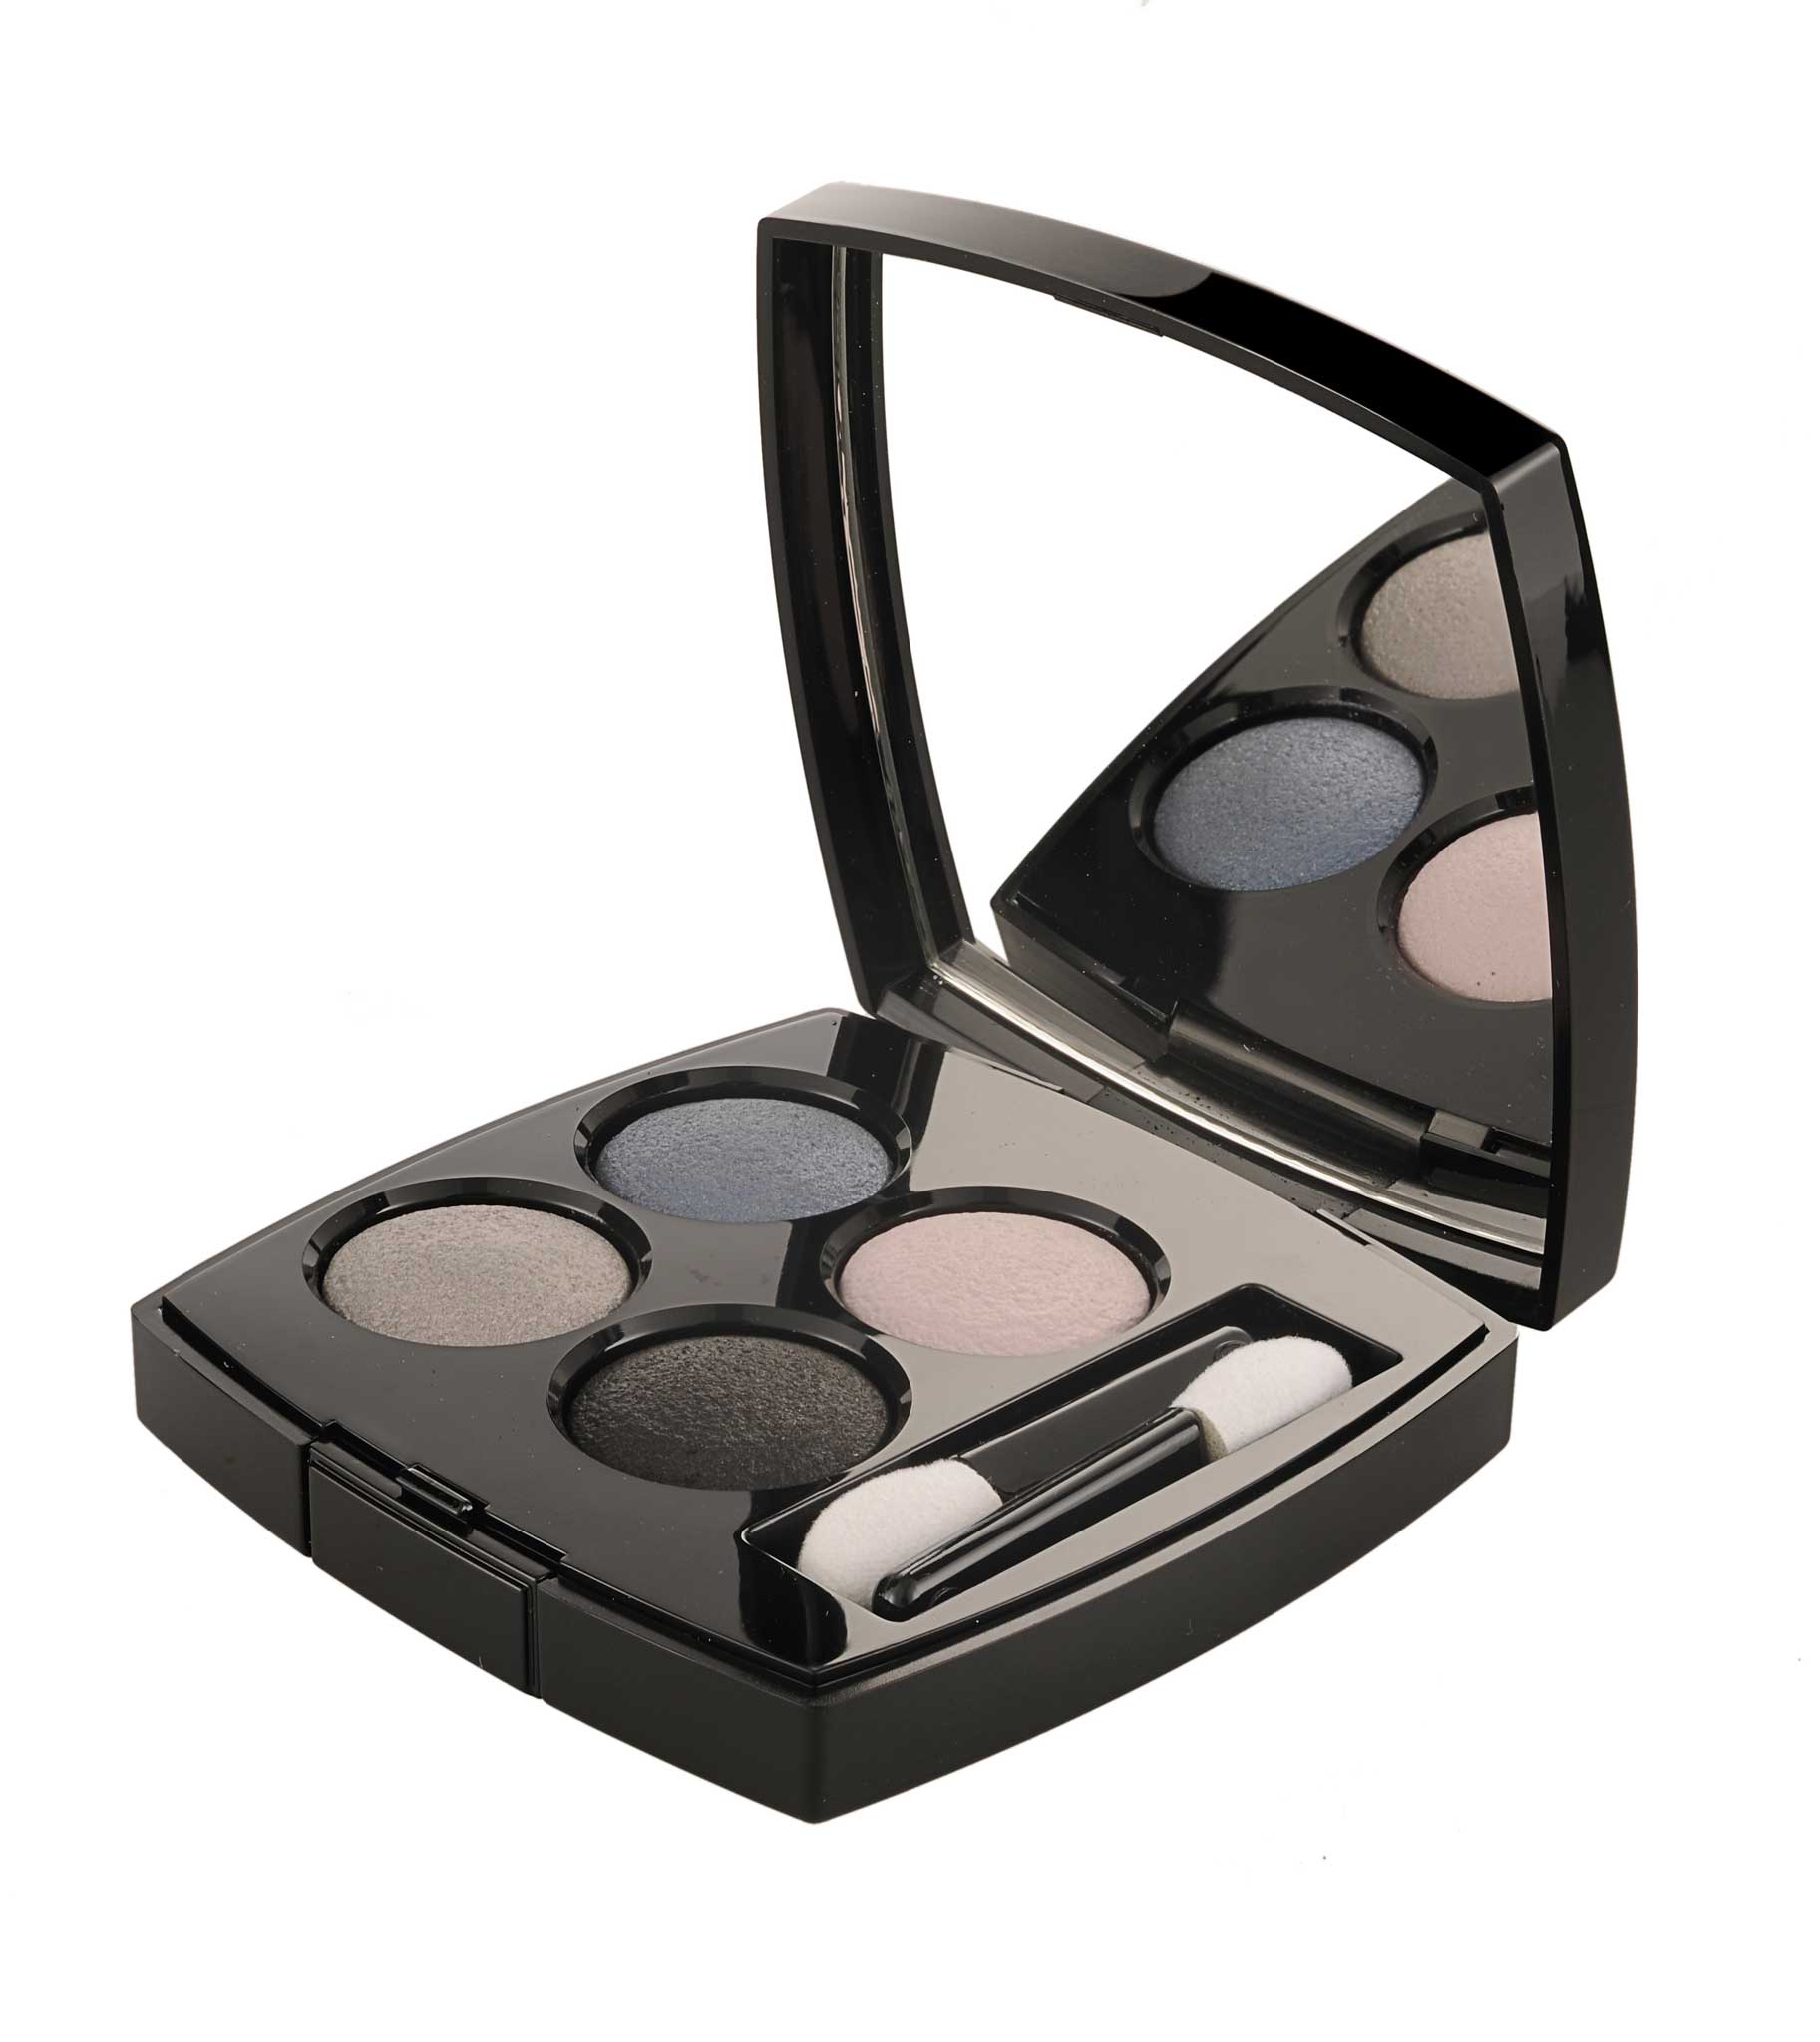 Les 4 Ombres (in 224 Tisse Riviera), Chanel, £40